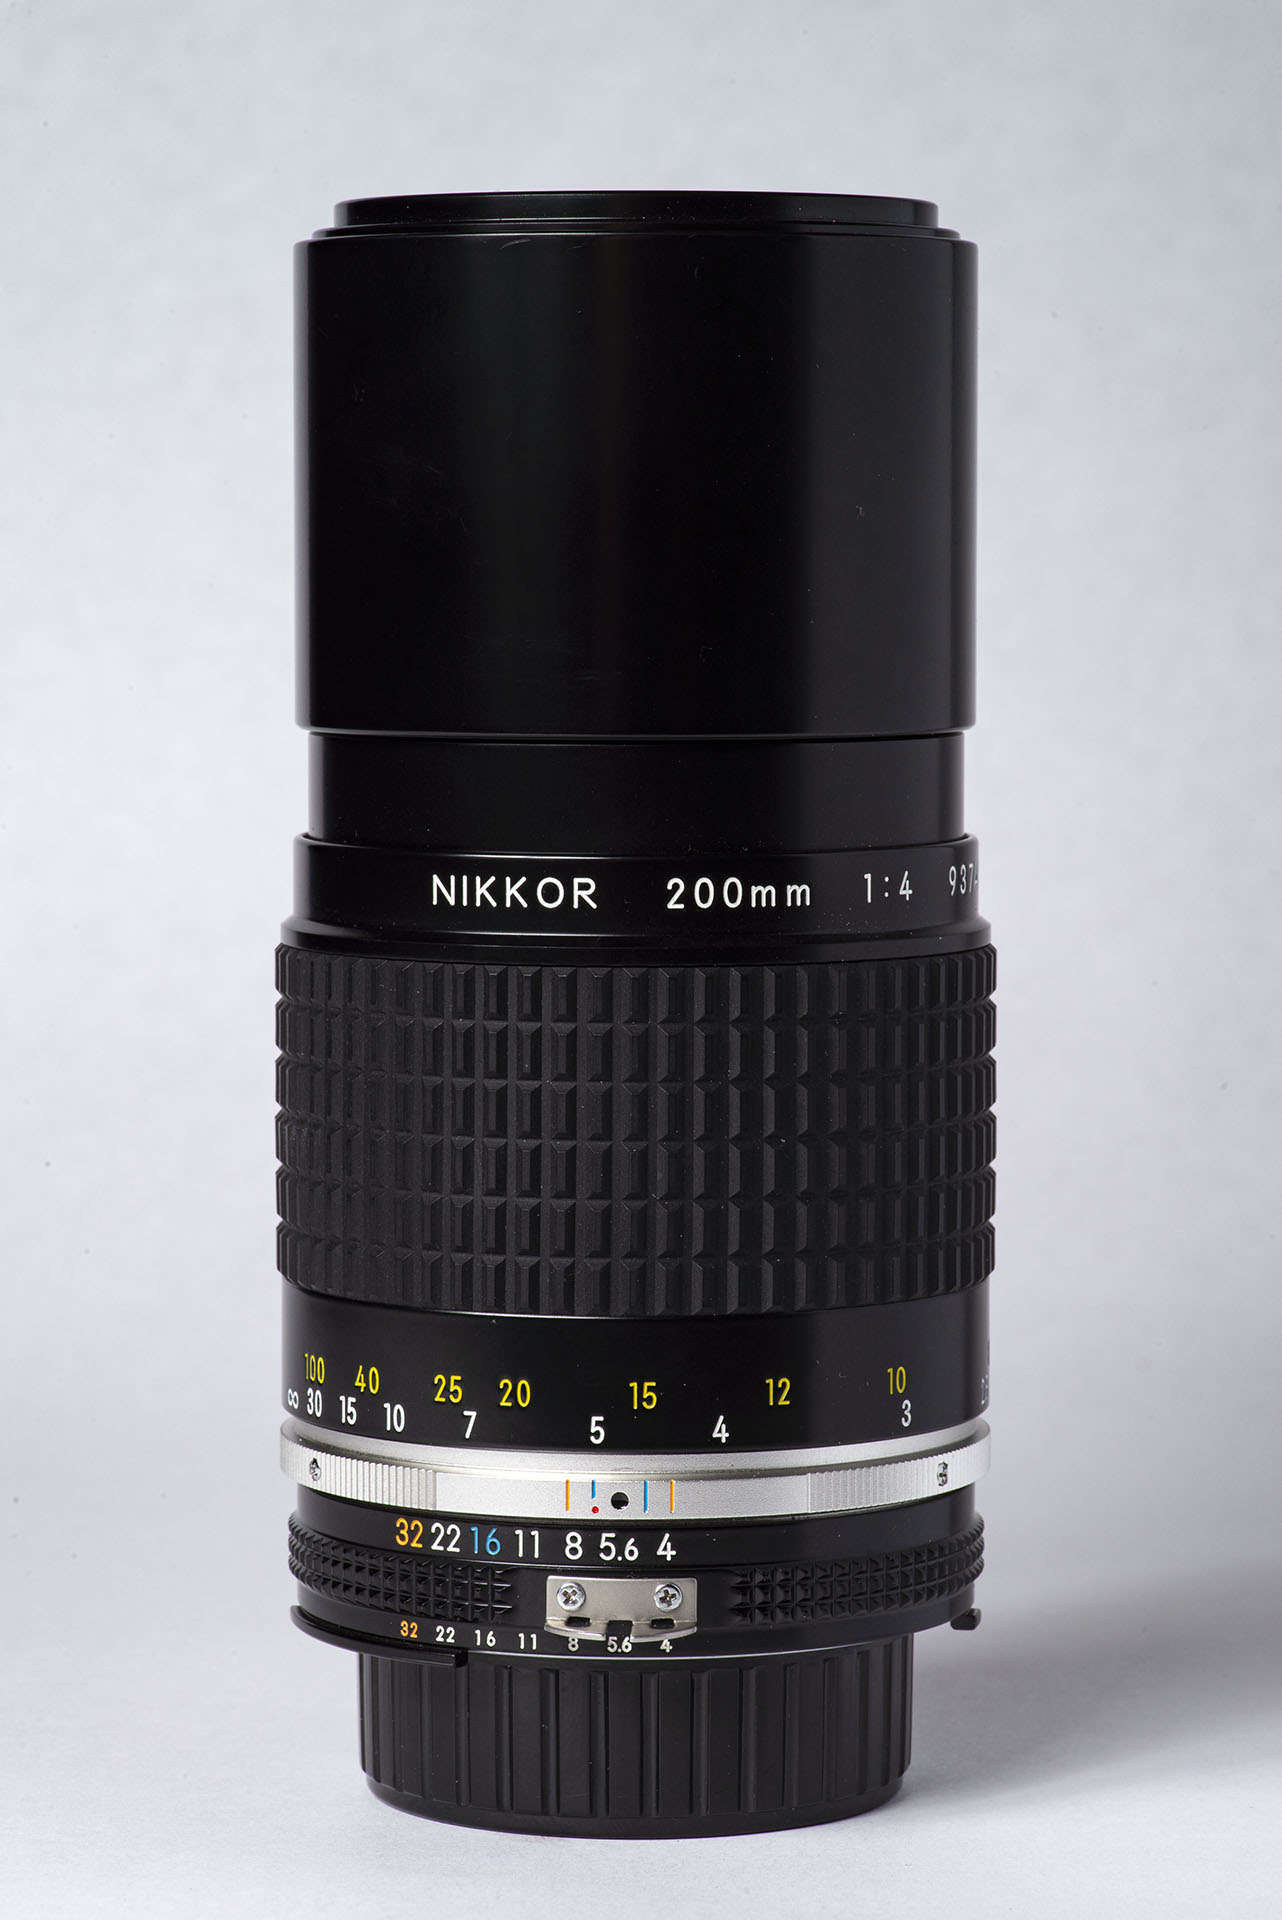 Legacy Lens Review: Nikkor 200mm f4 Ai-s - The Noisy Shutter